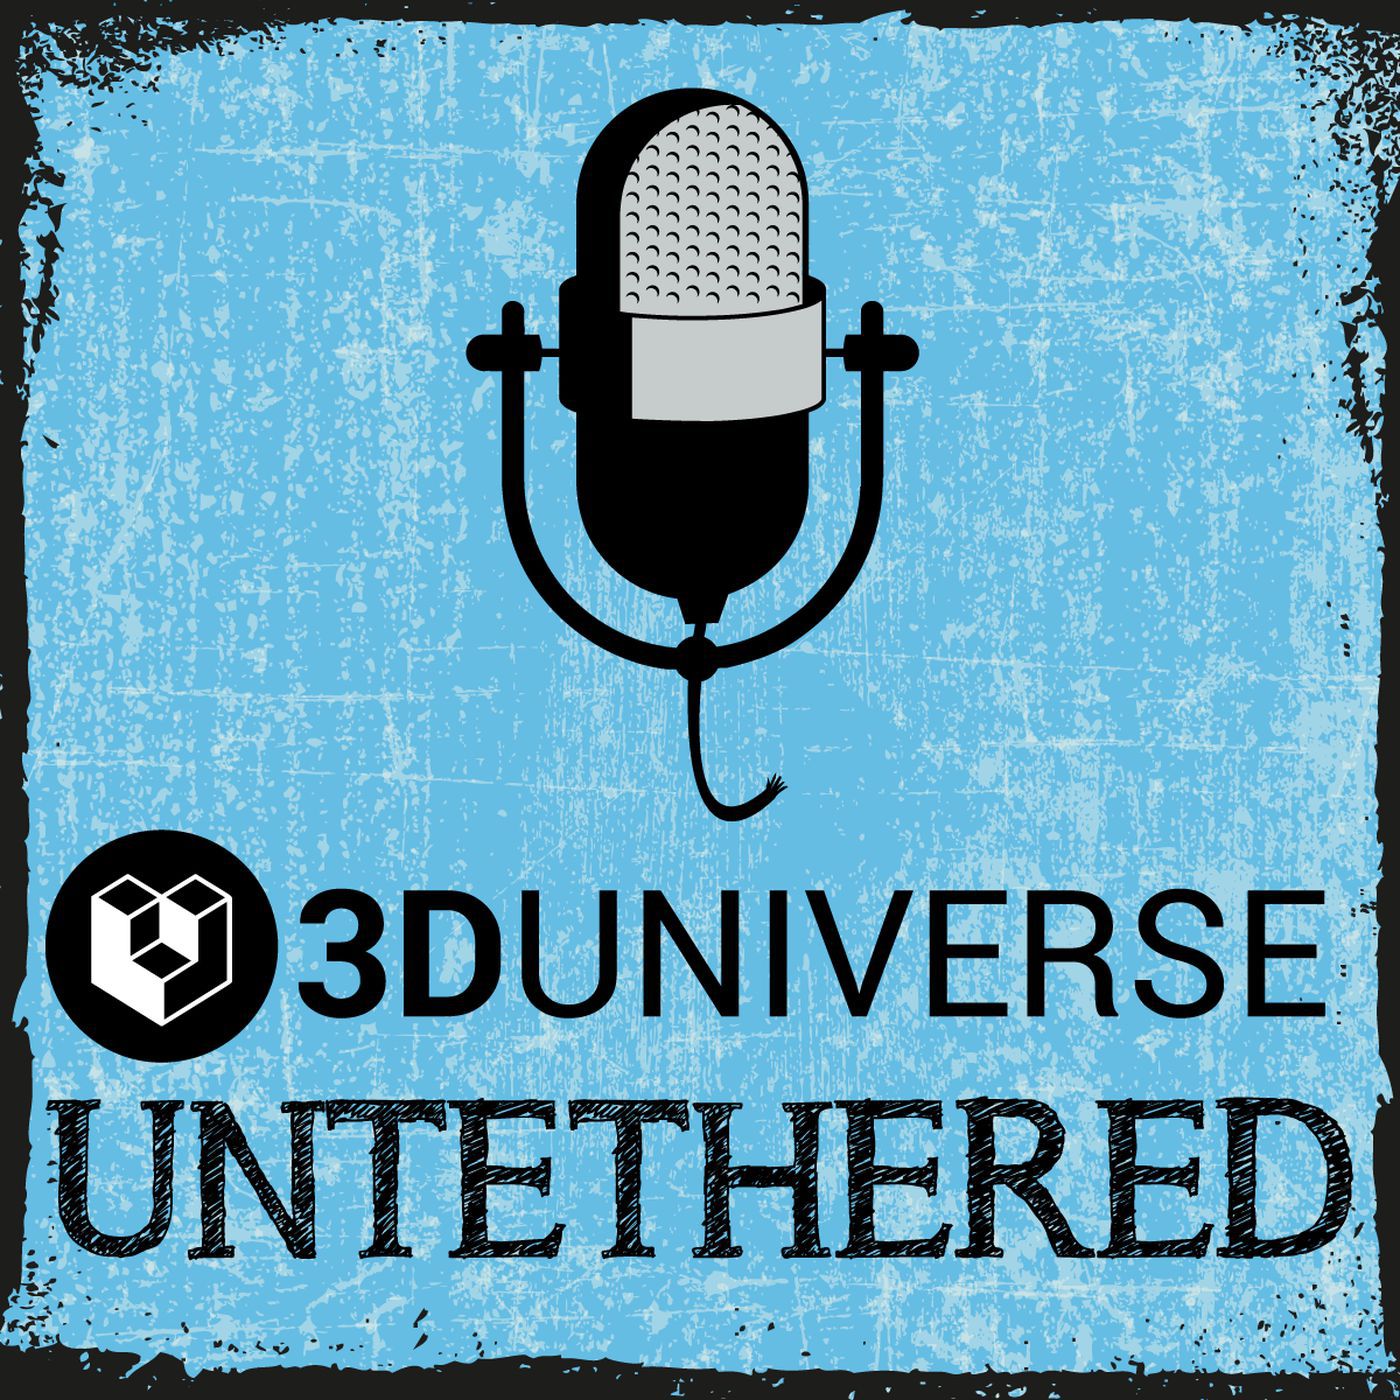 3D Universe Untethered podcast show image